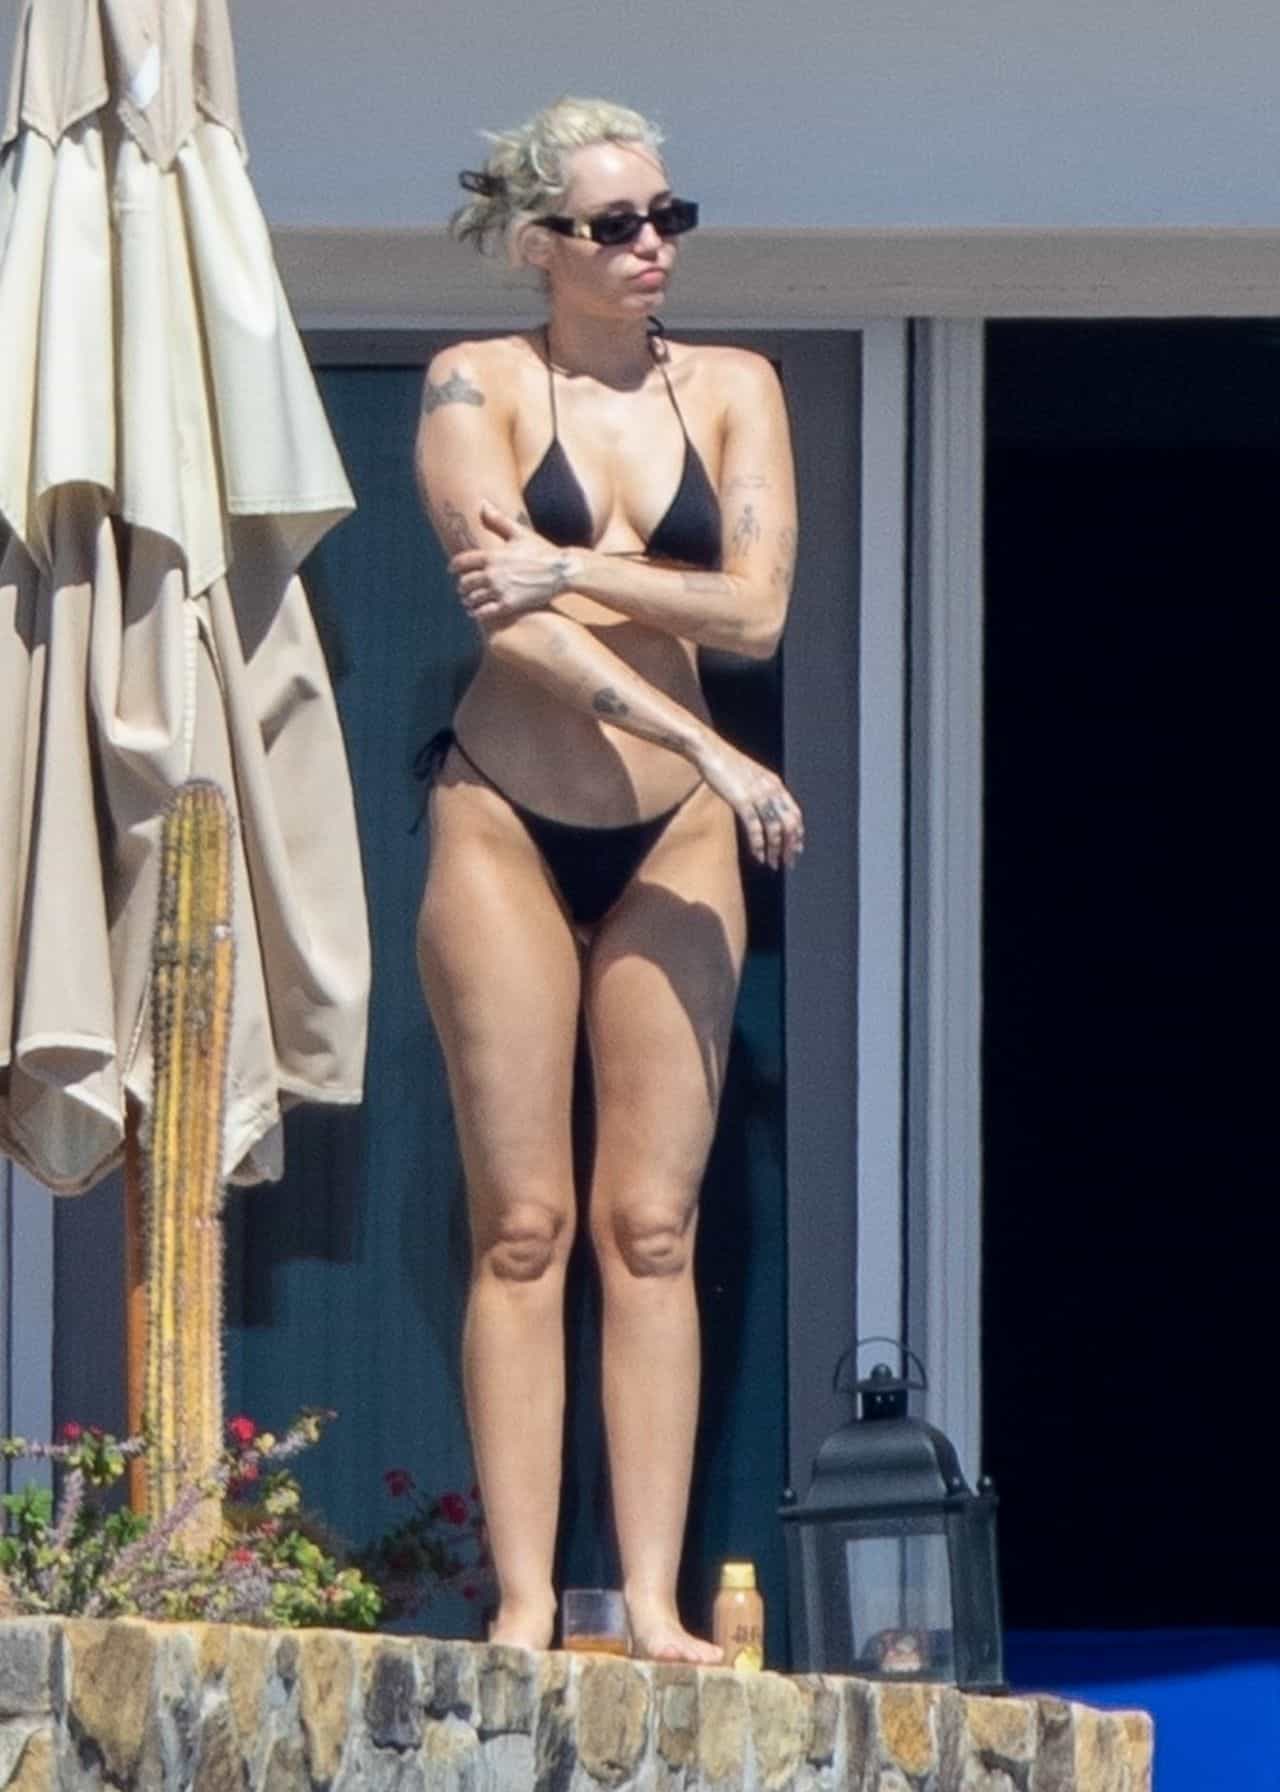 Miley Cyrus Turns Up the Heat in a Tiny Black Bikini by the Pool in Mexico